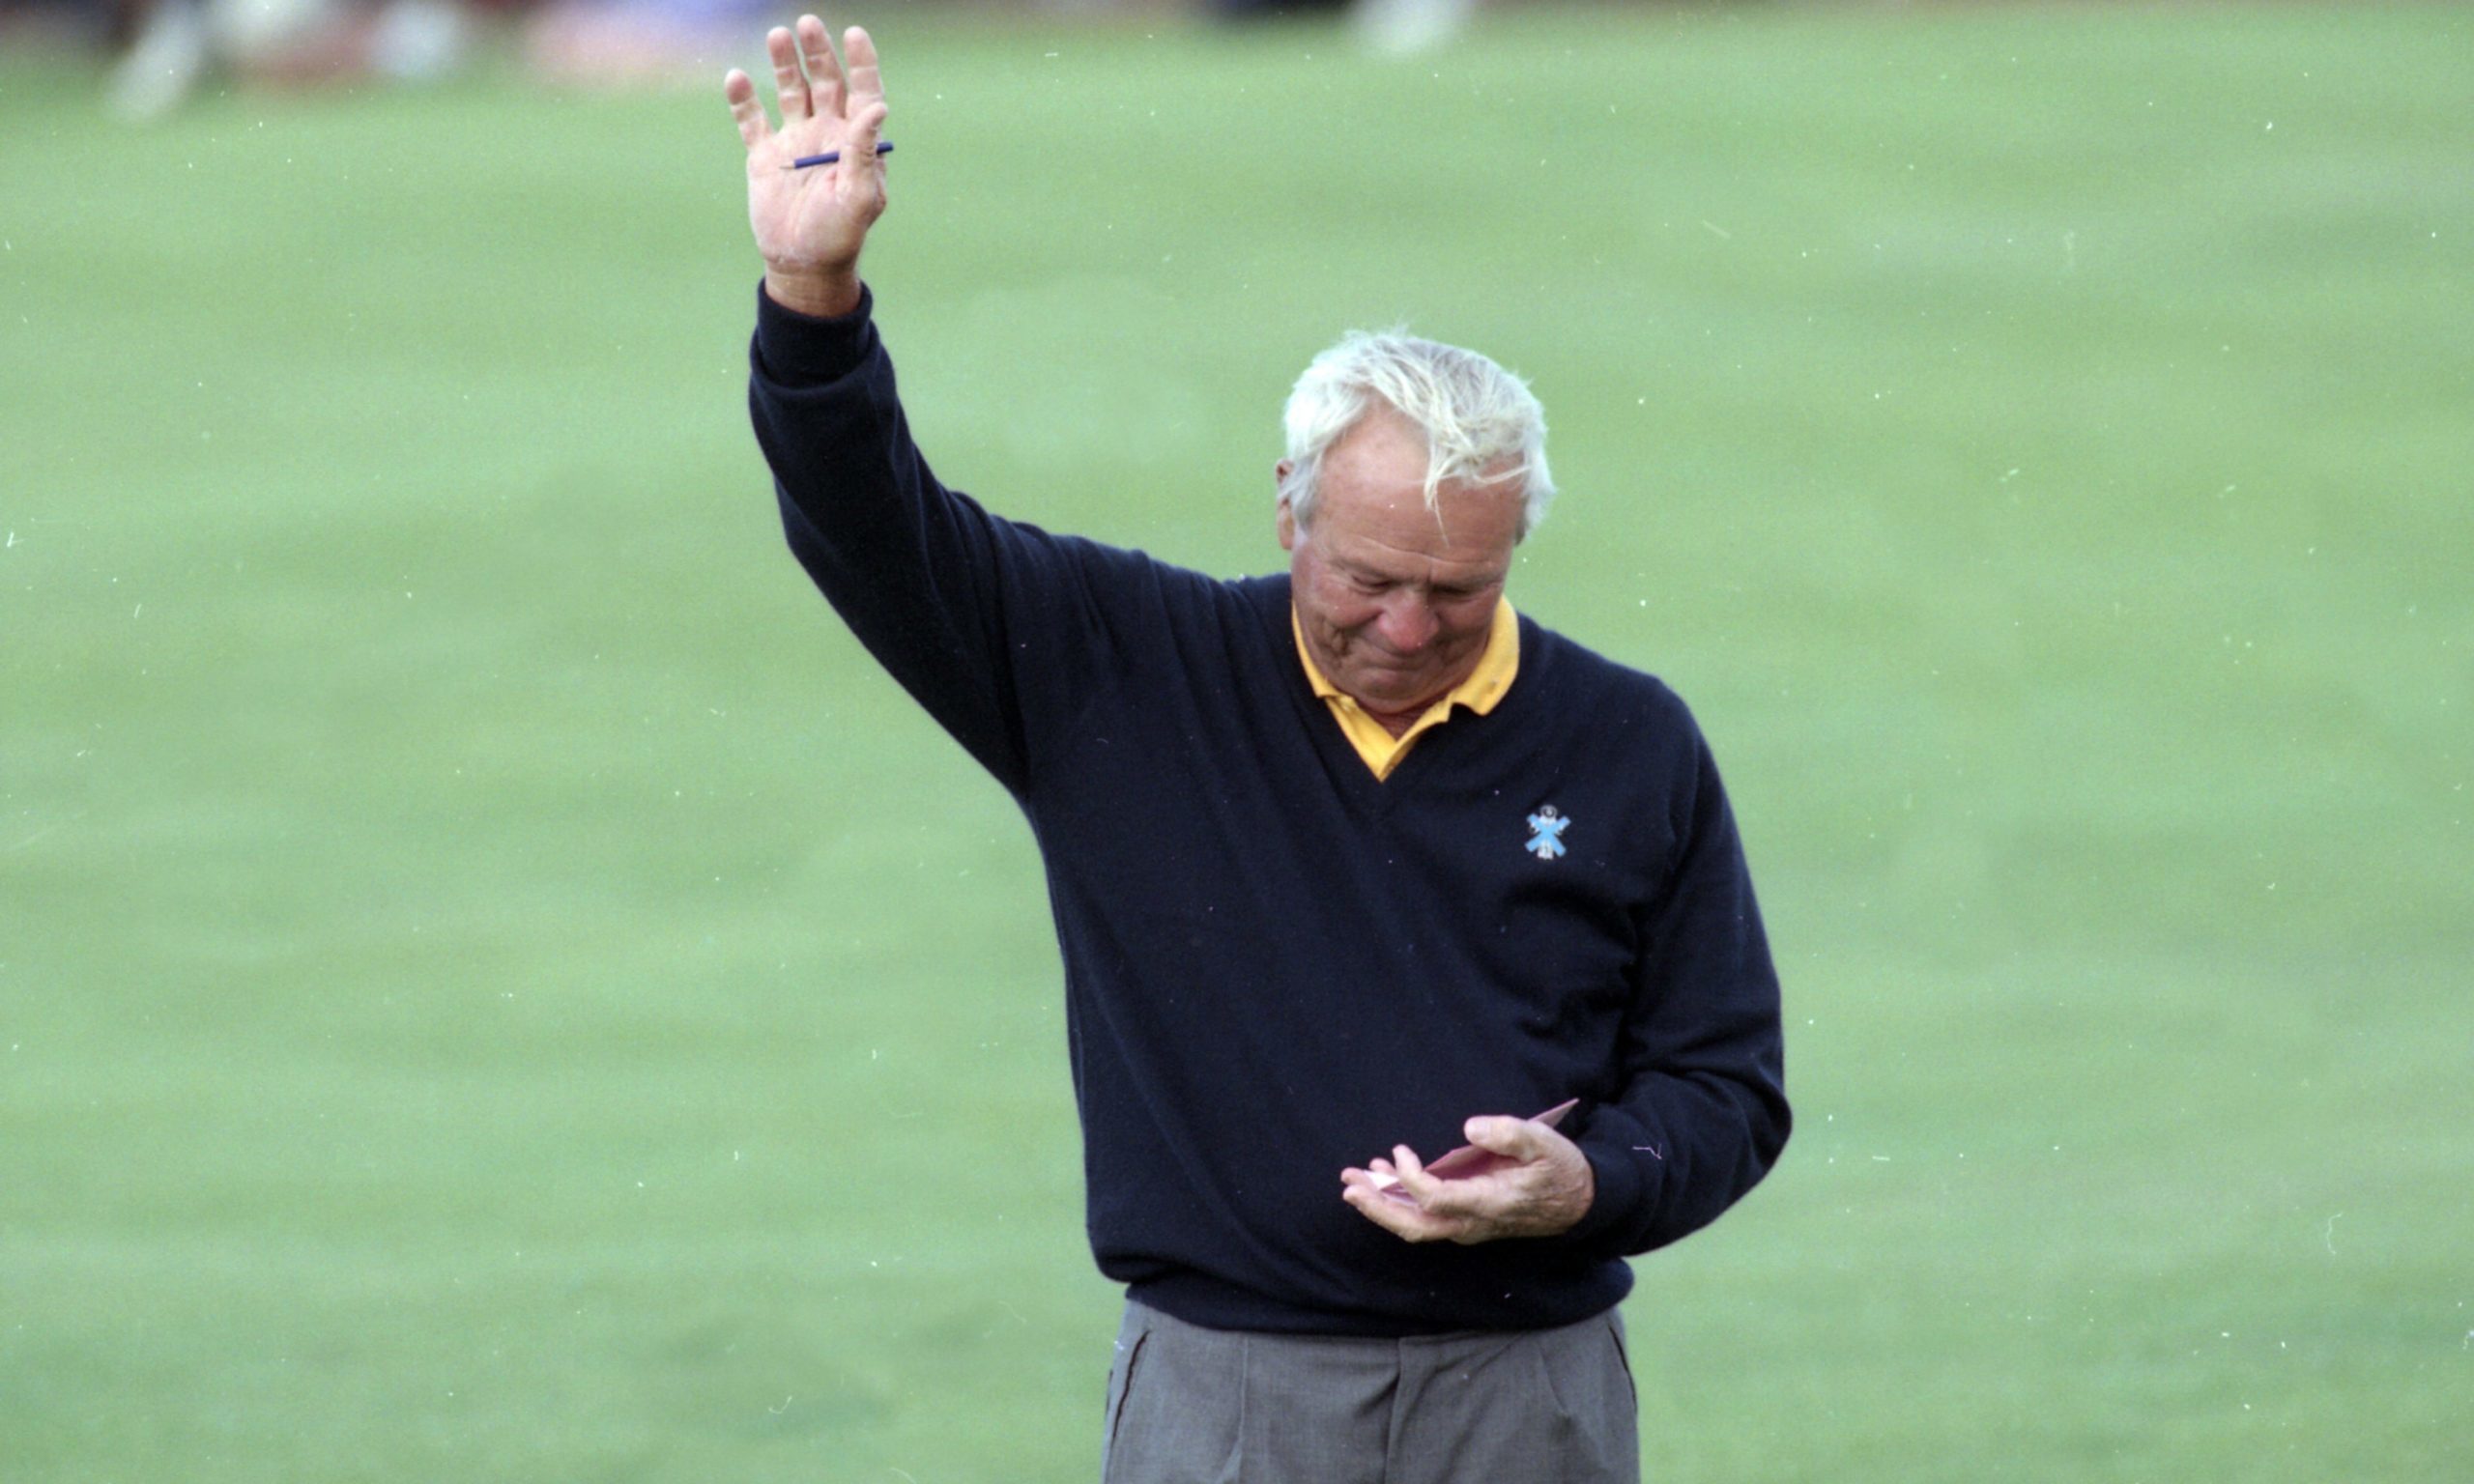 Arnold Palmer waves farewell in 1995 at the Old Course.